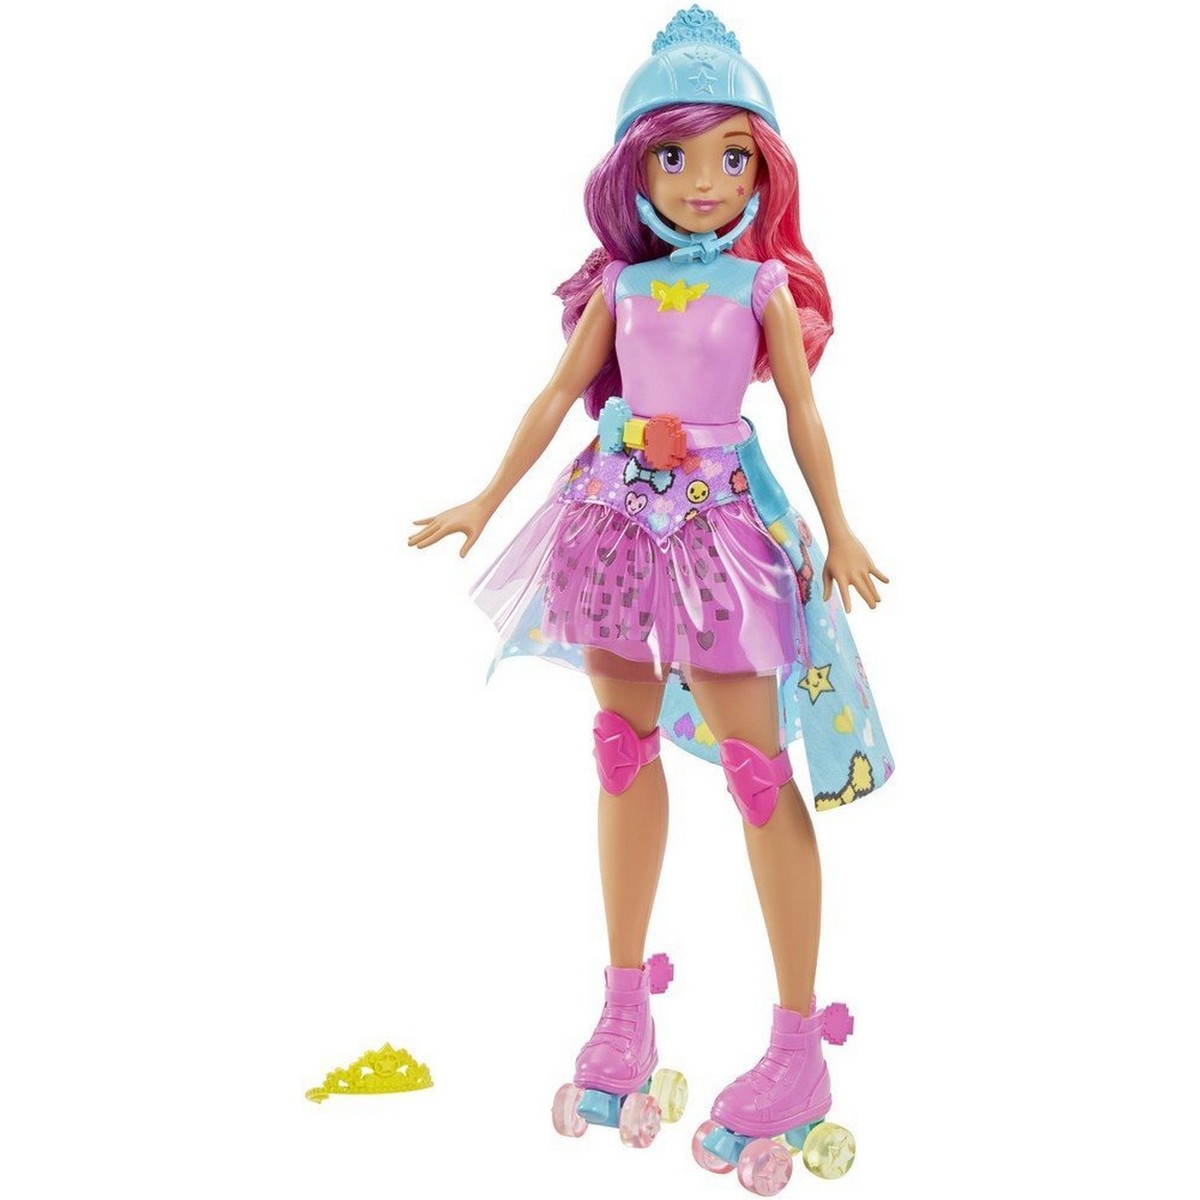 Barbie-Video-Game-Hero-Match-Game-Princess-Doll-Pink-DTW00-1352353-02